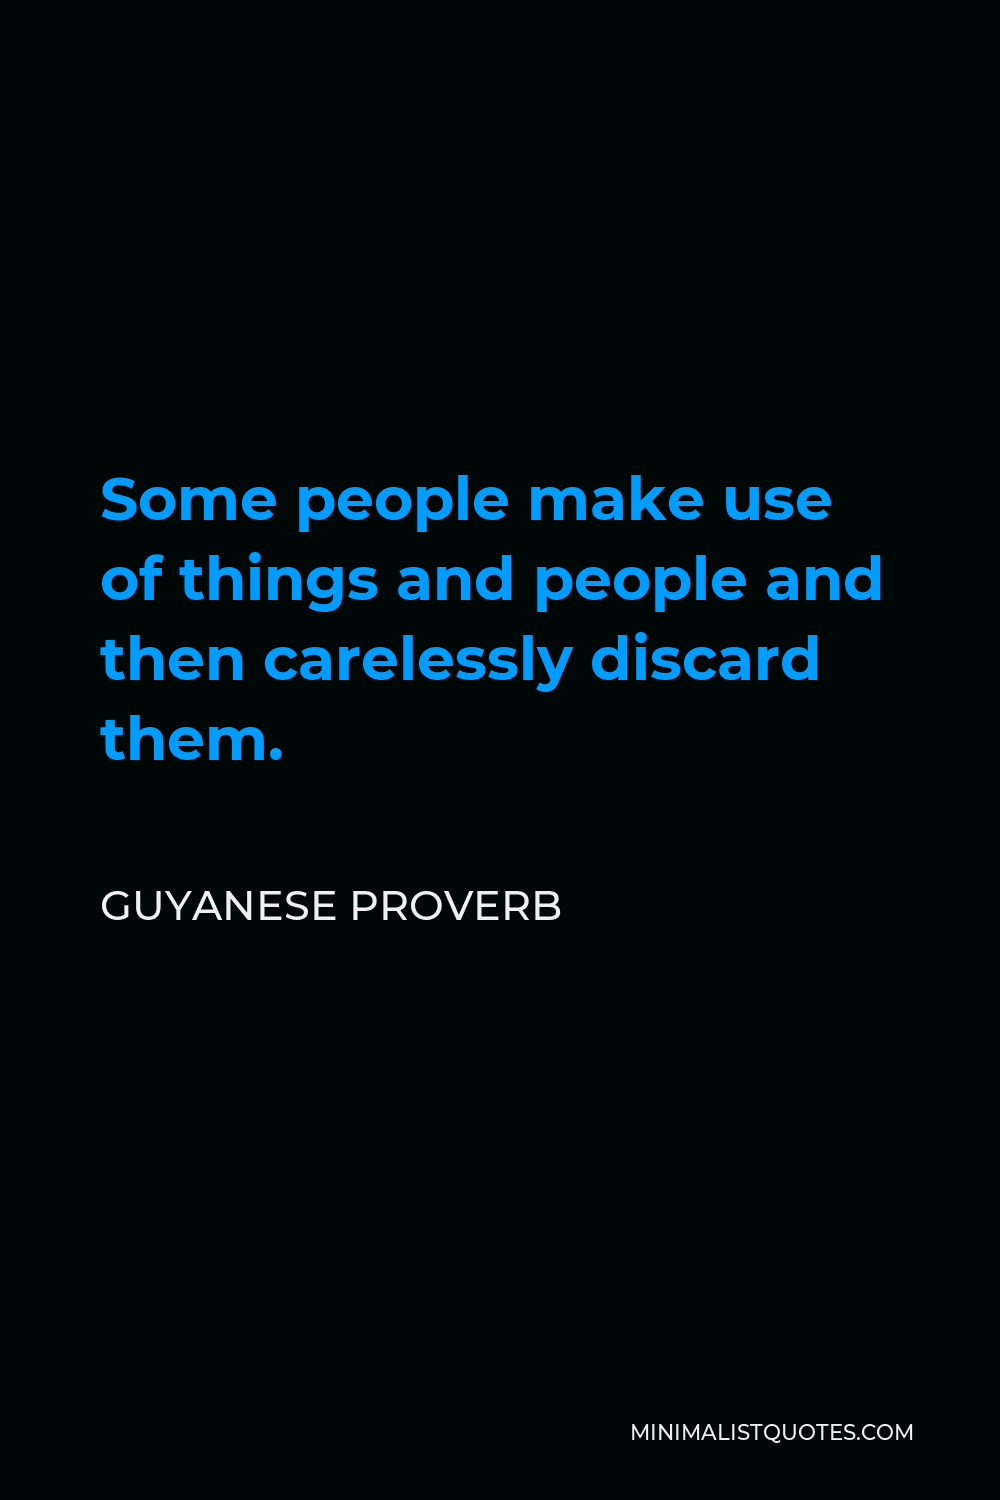 Guyanese Proverb Quote - Some people make use of things and people and then carelessly discard them.